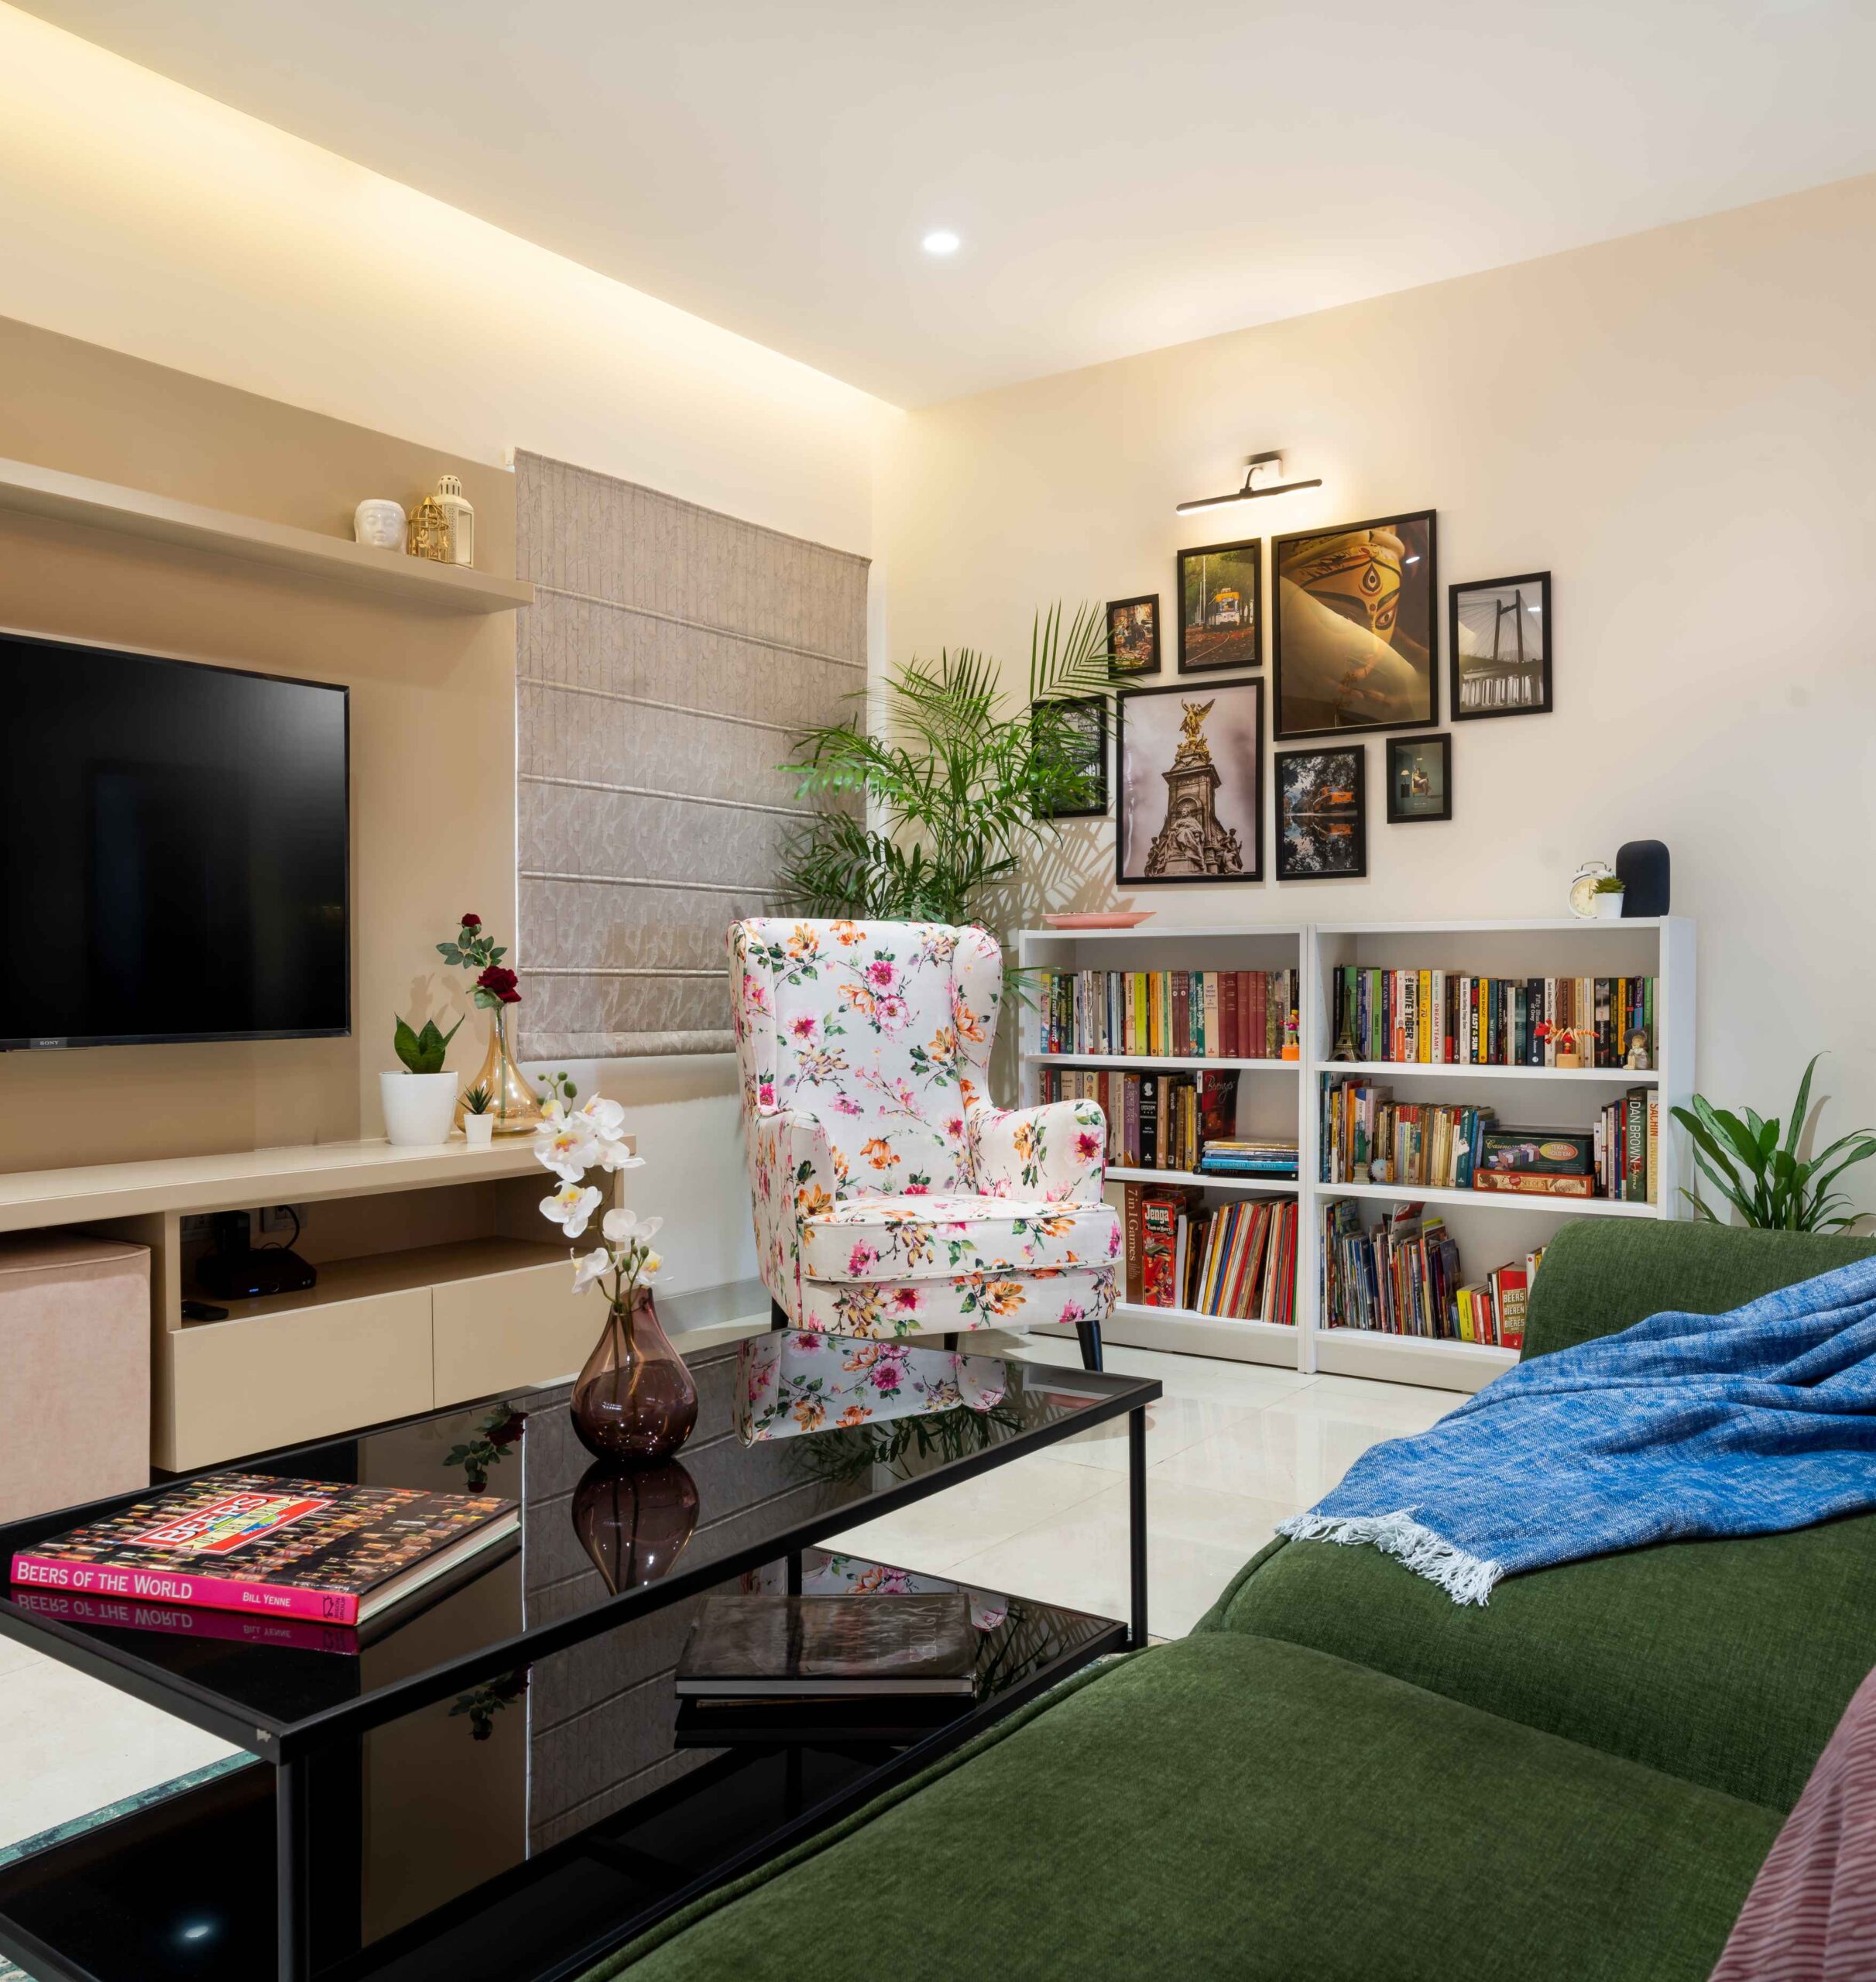 Home of Hues, a family home in Hyderabad, designed by Studio Emerald 3